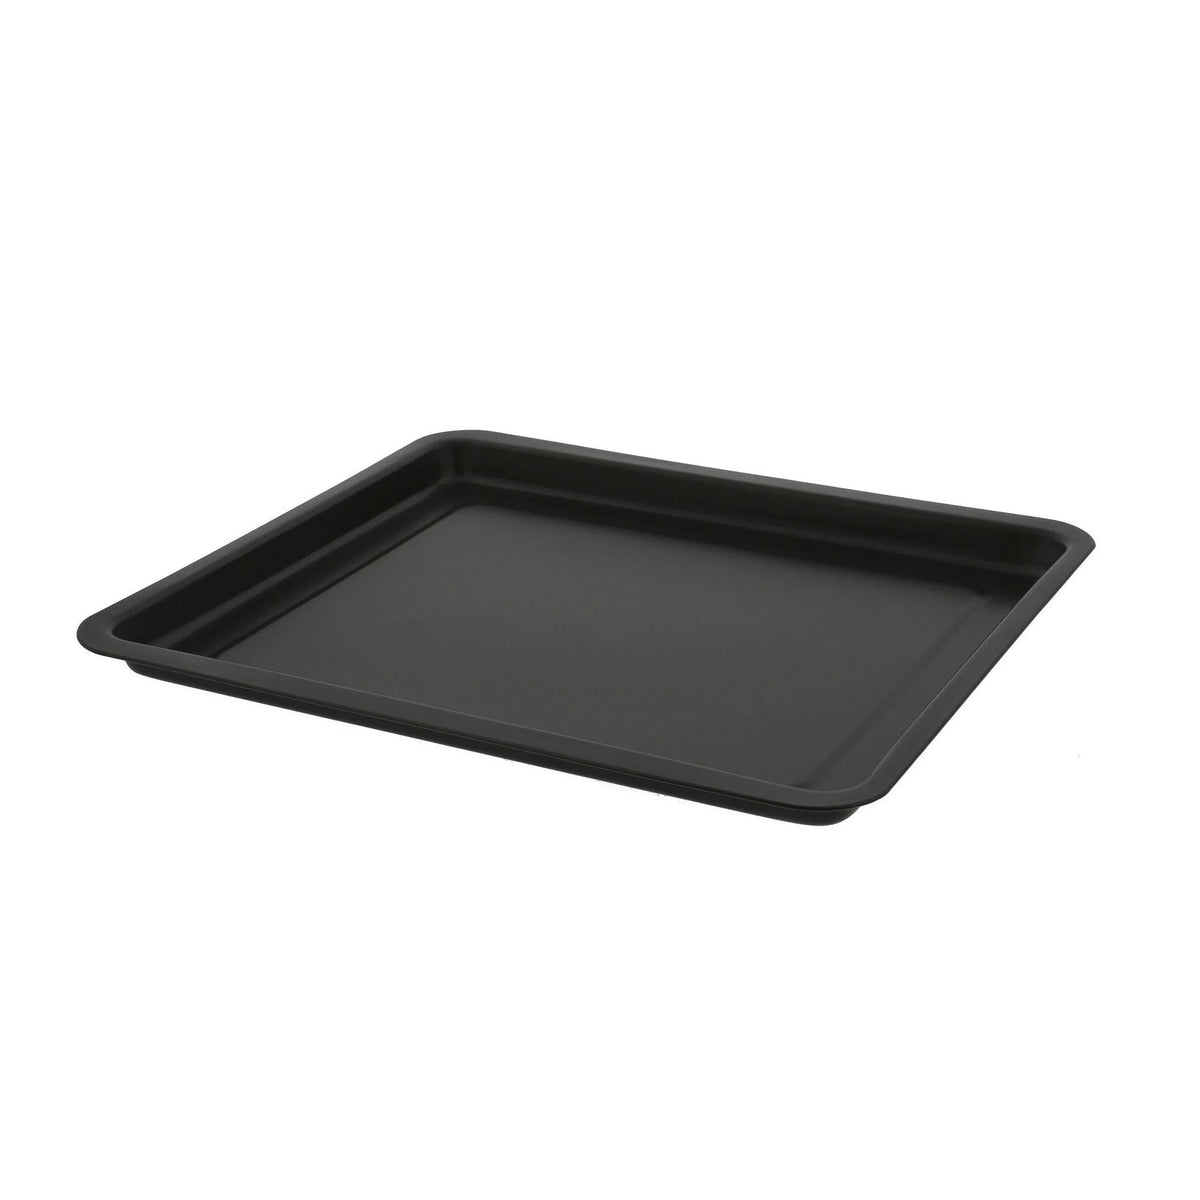 Oven tray Size: 26 x 37 cm.